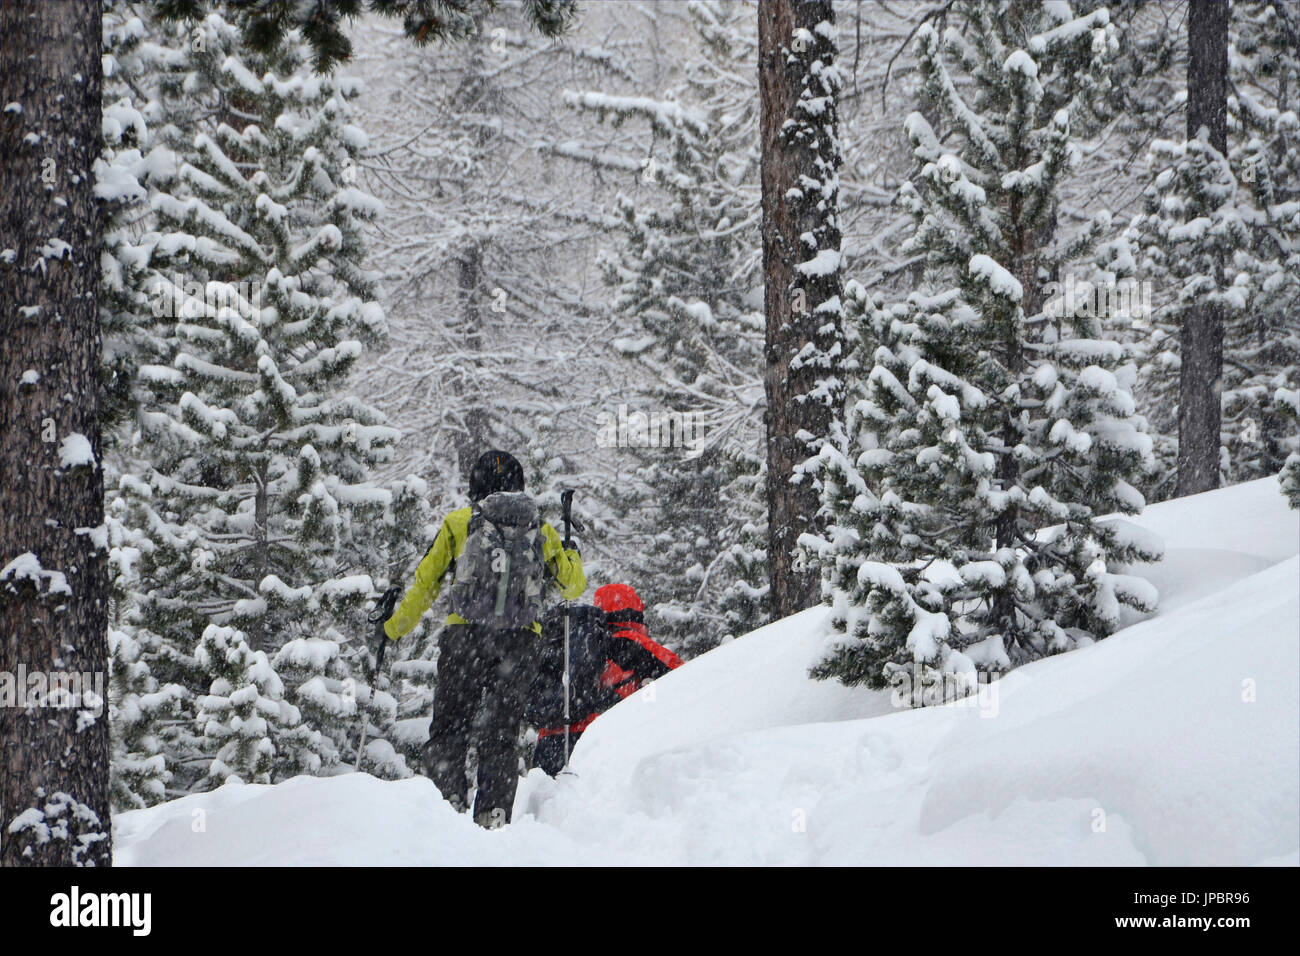 Walking (ski mountaineering) in the forest while snowing, Nevache, France Stock Photo